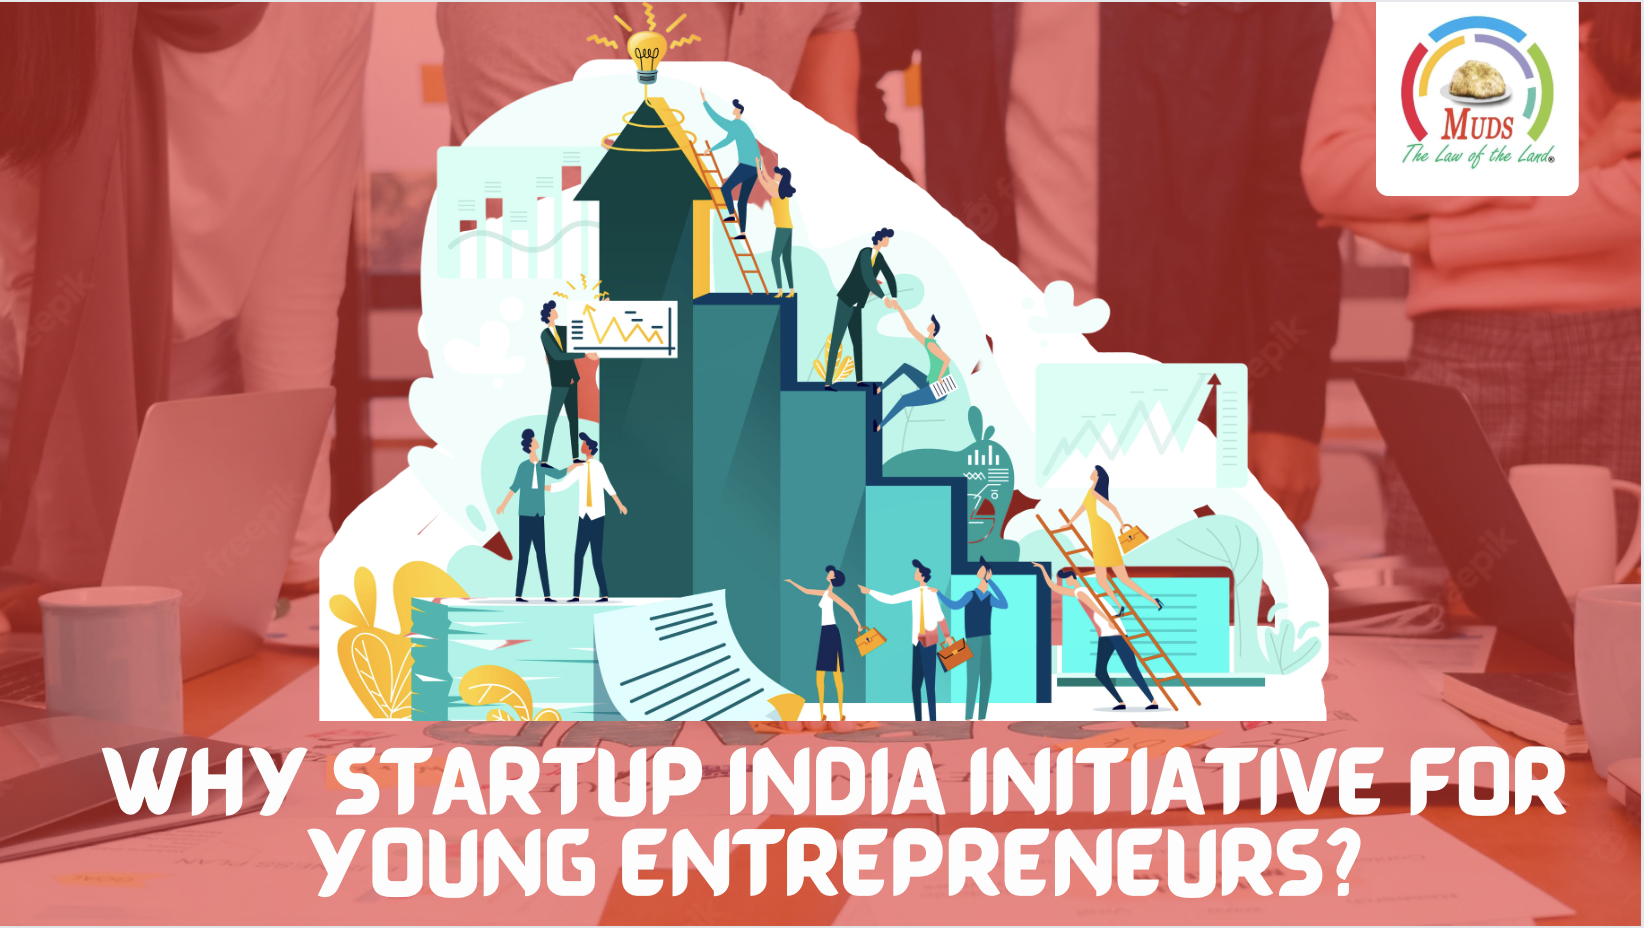 Startup India A Government Program